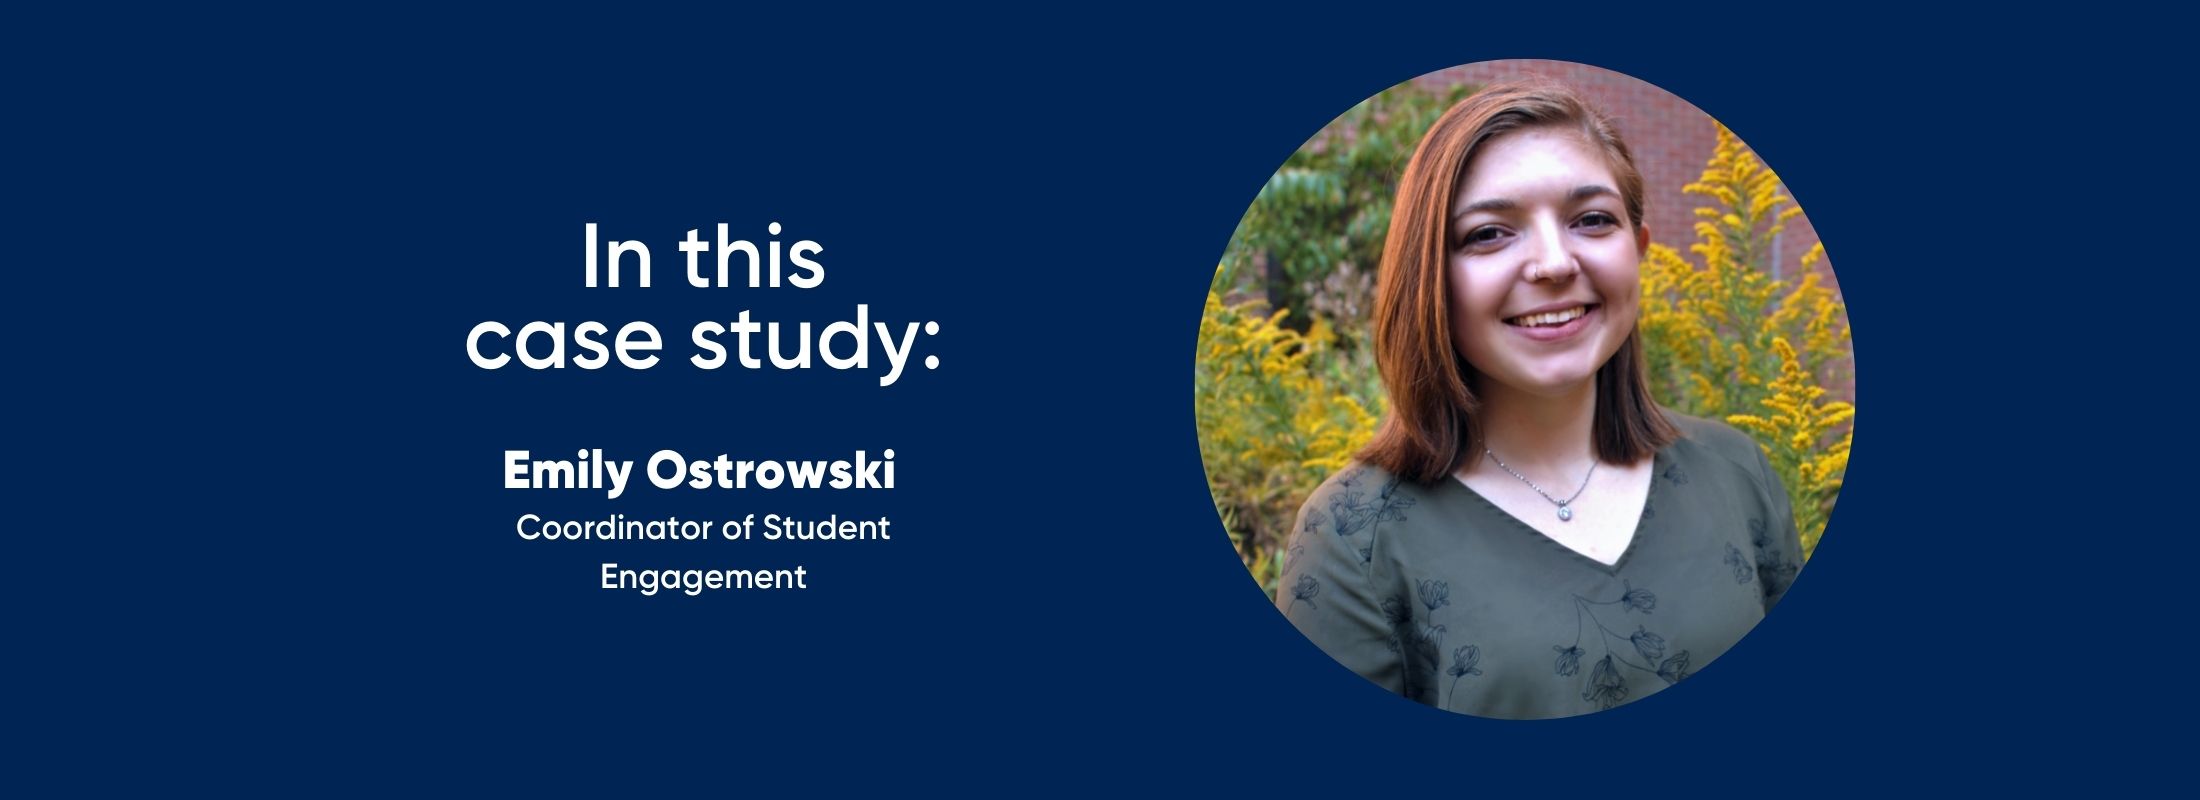 in this case study: Emily Ostrowski — coordinator of student engagement